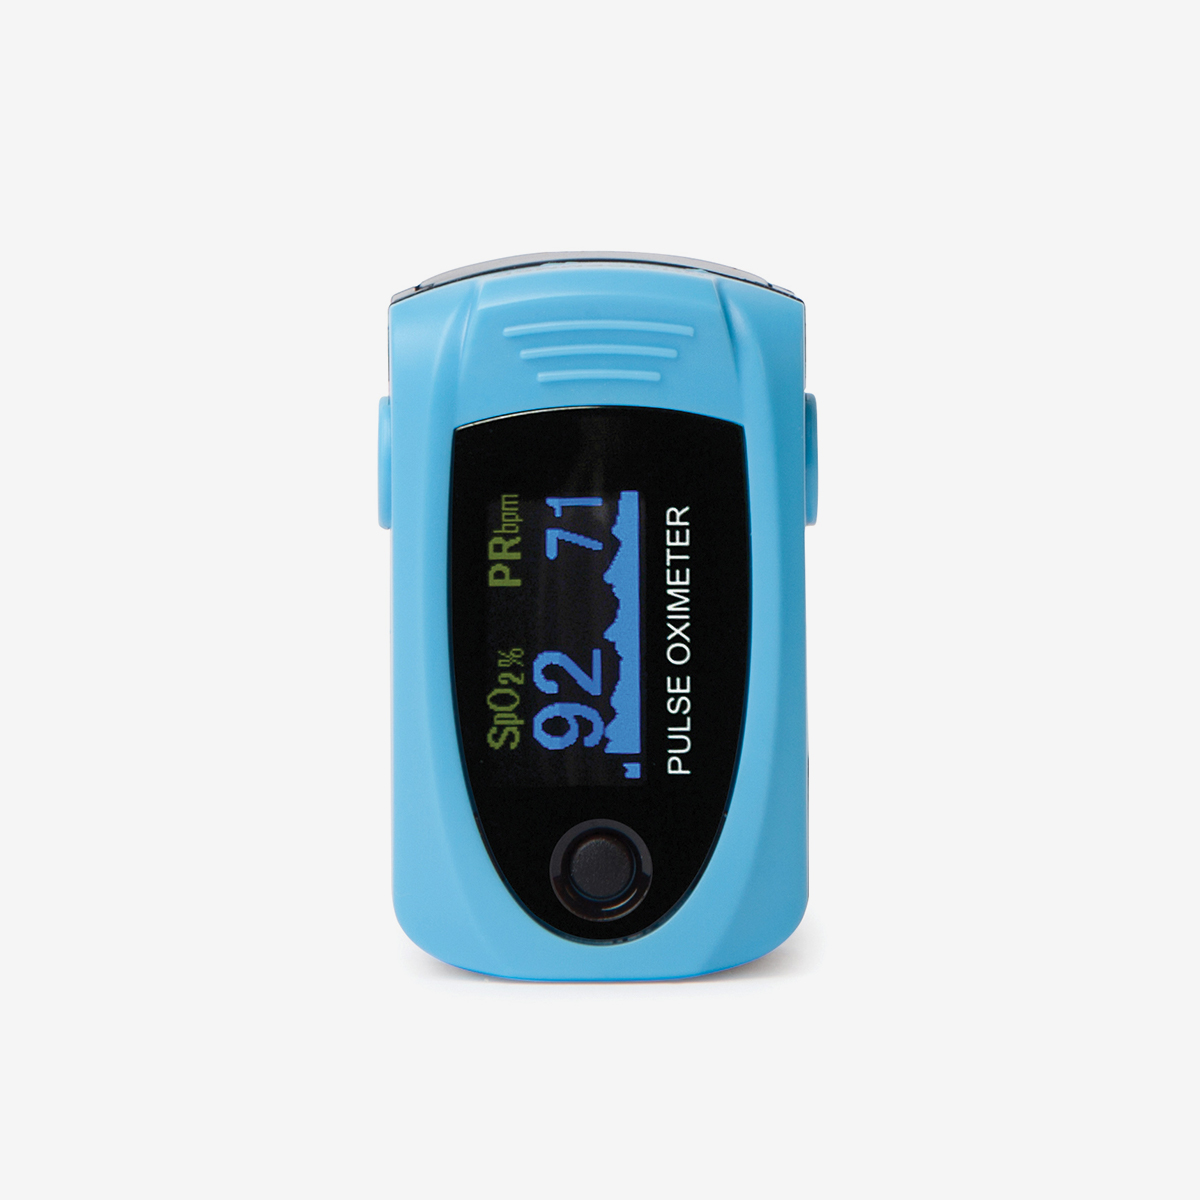 Vertical view of light blue MD300 C63 pulse oximeter on white background